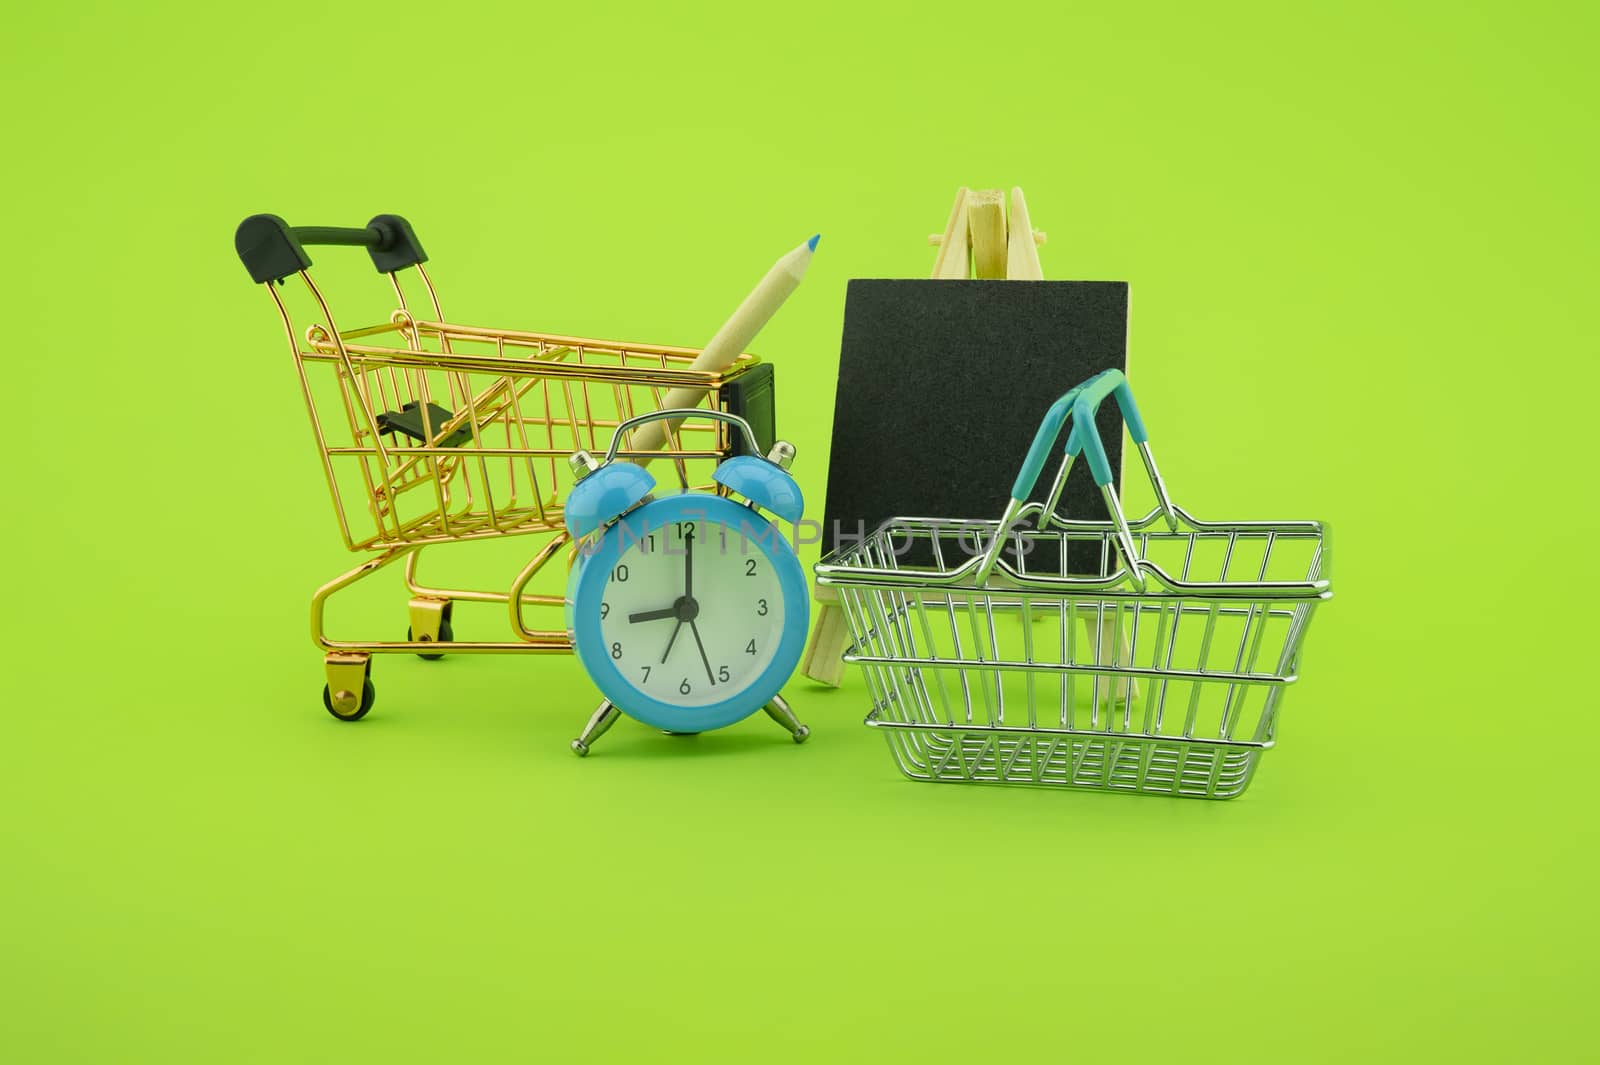 Shopping concept with shopping cart, basket and alarm clock, small chalk board over a green background